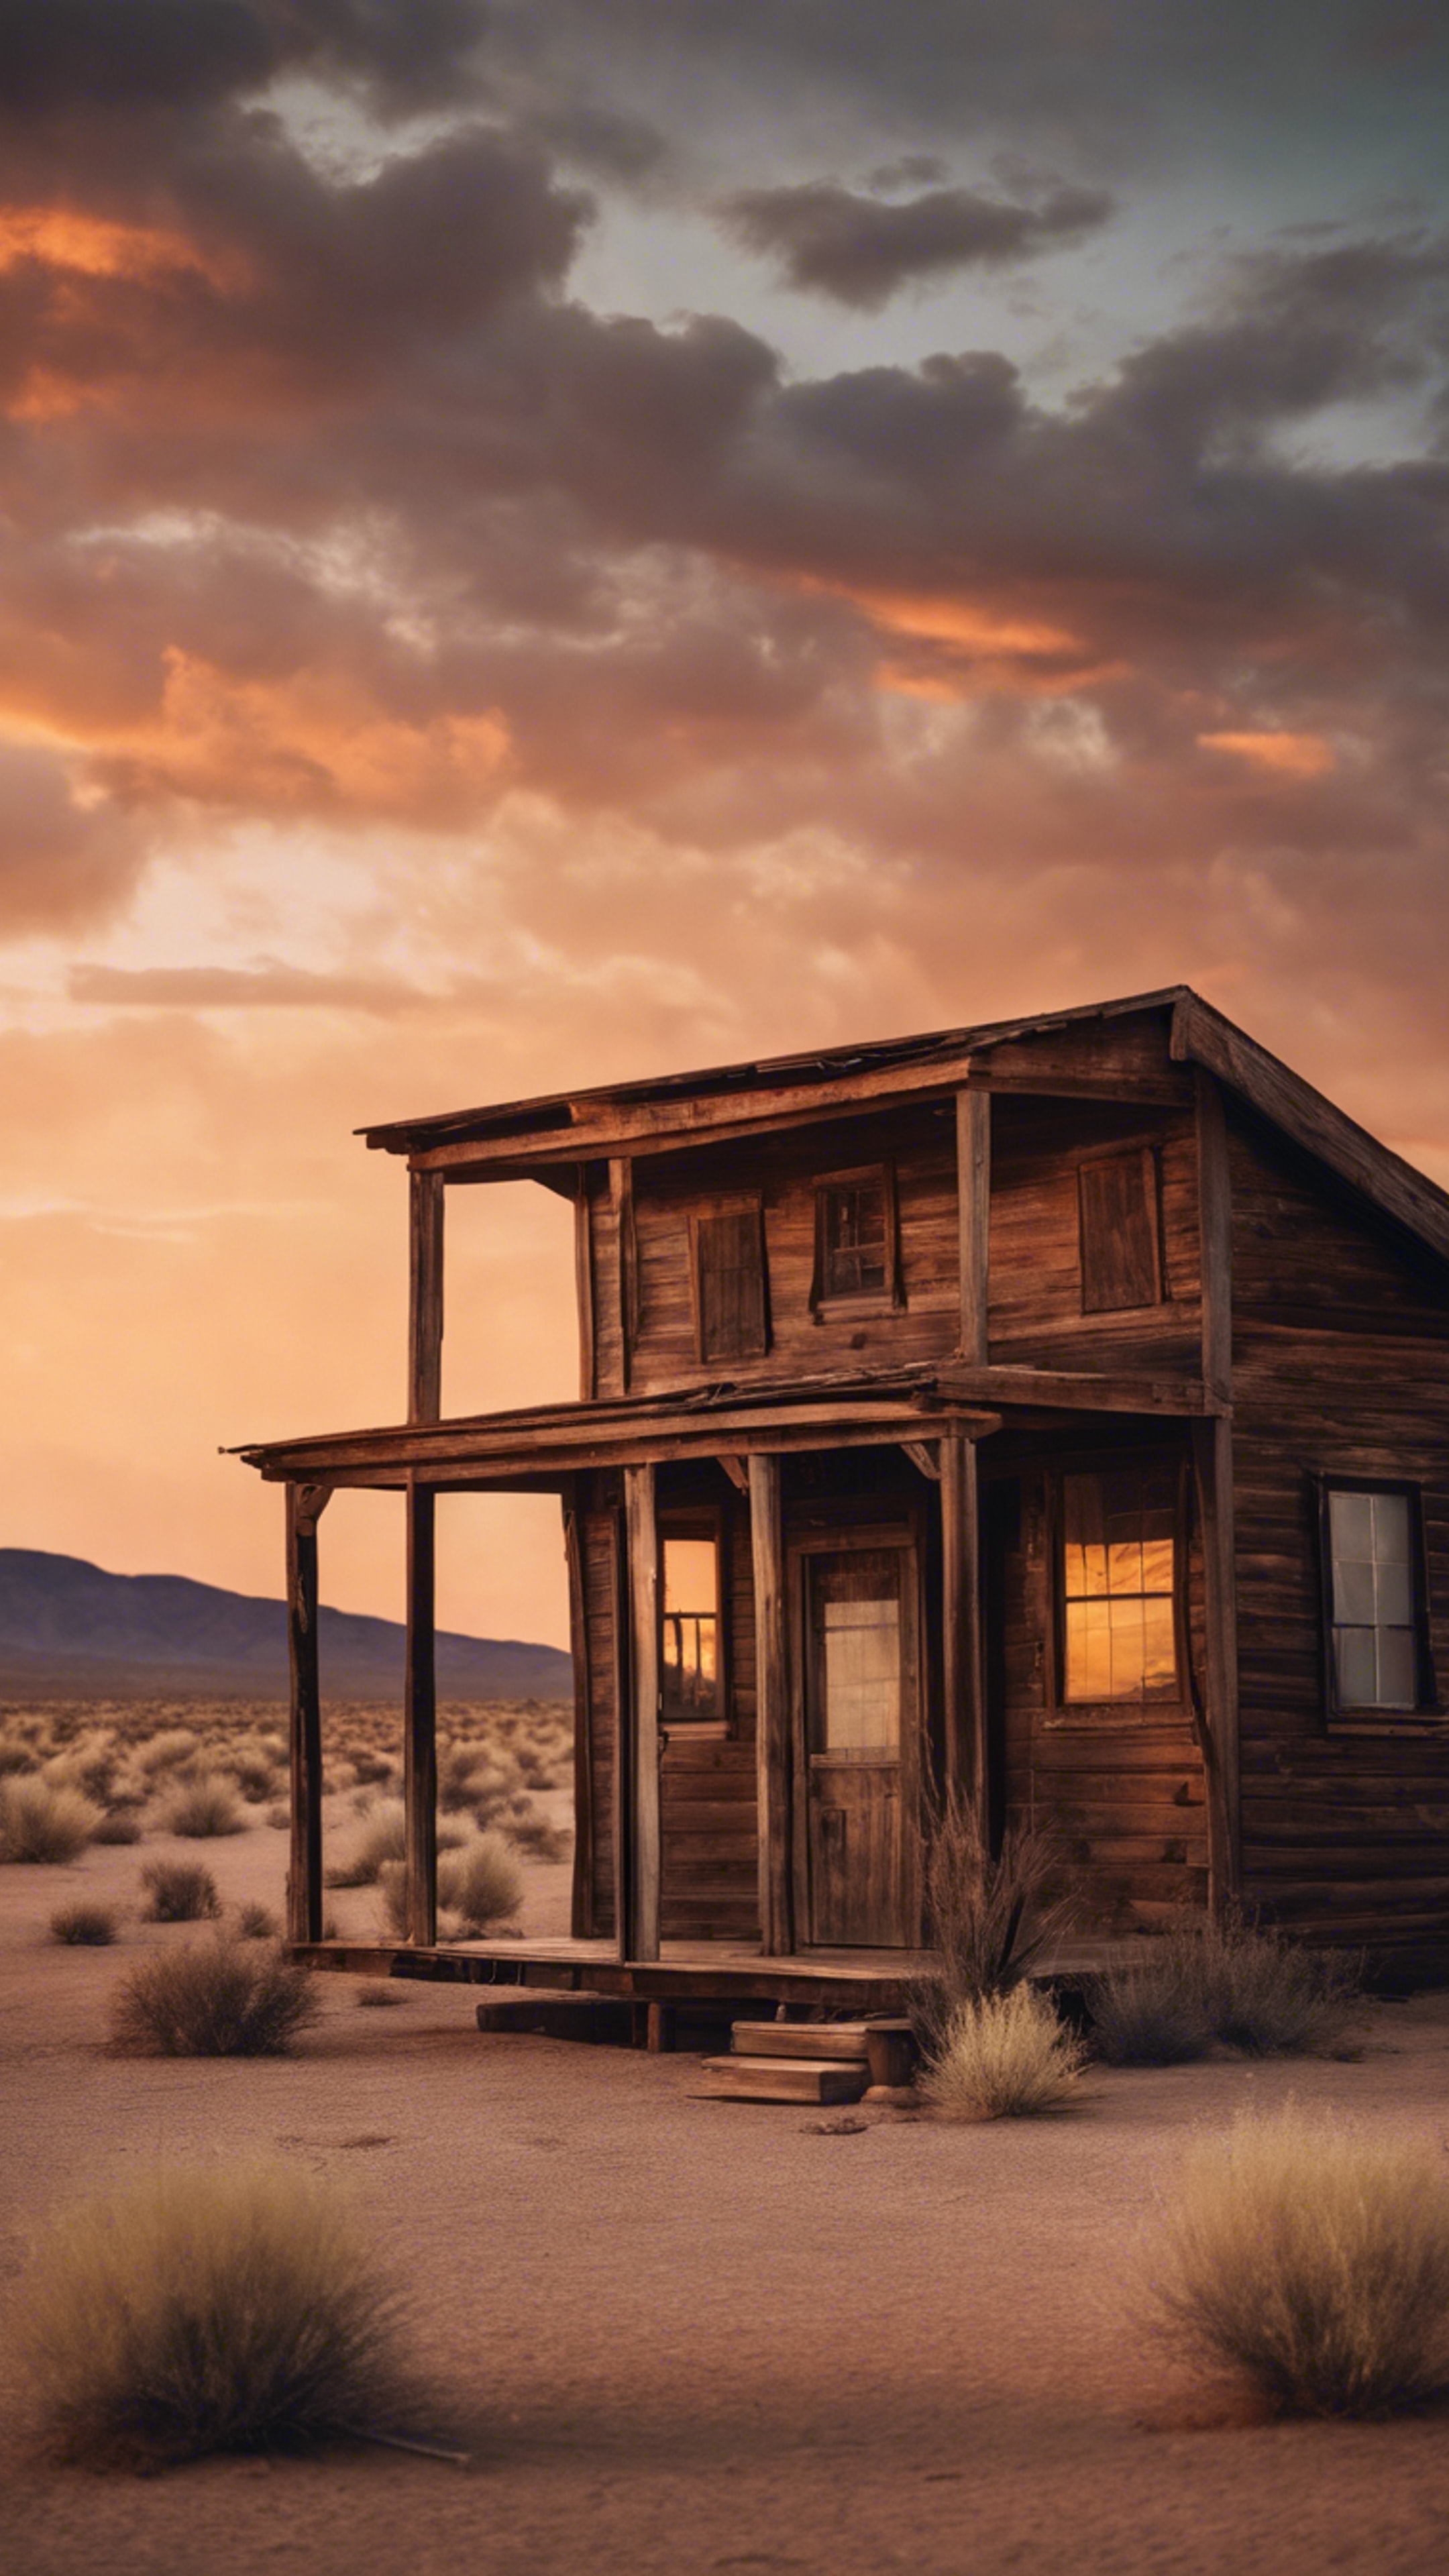 A dust-swept desert scene with a lone cabin standing resiliently during a blazing sunset in the wild west. Fondo de pantalla[55ae6b4a2ff440e59218]